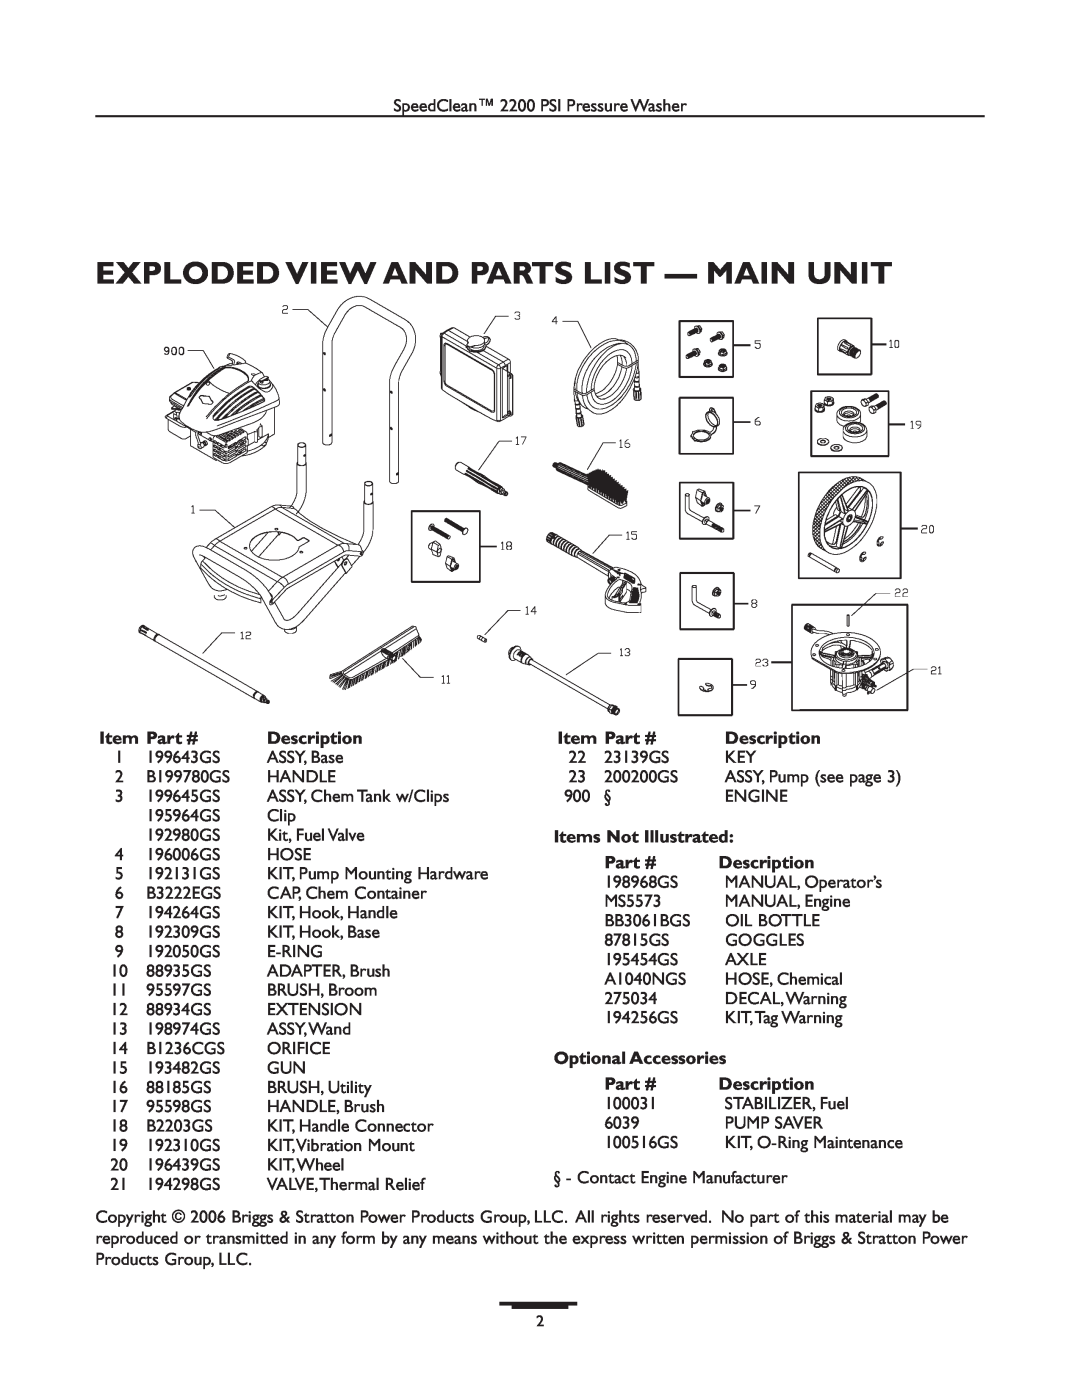 Briggs & Stratton 020261-1 manual Exploded View And Parts List - Main Unit 